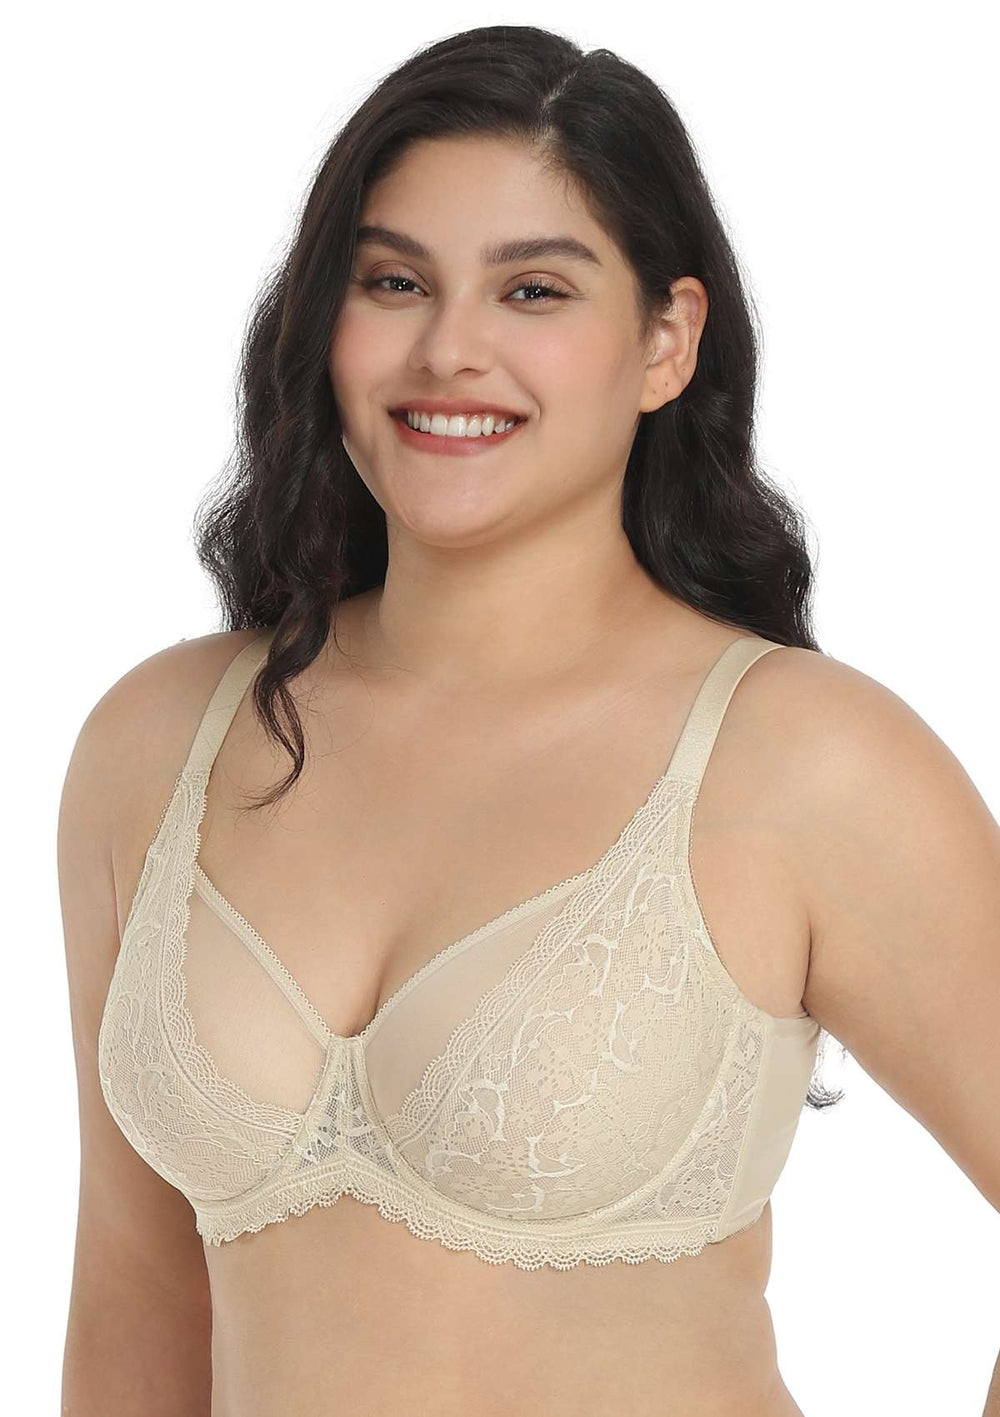 Anemone One Size Band Bras & Bra Sets for Women for sale